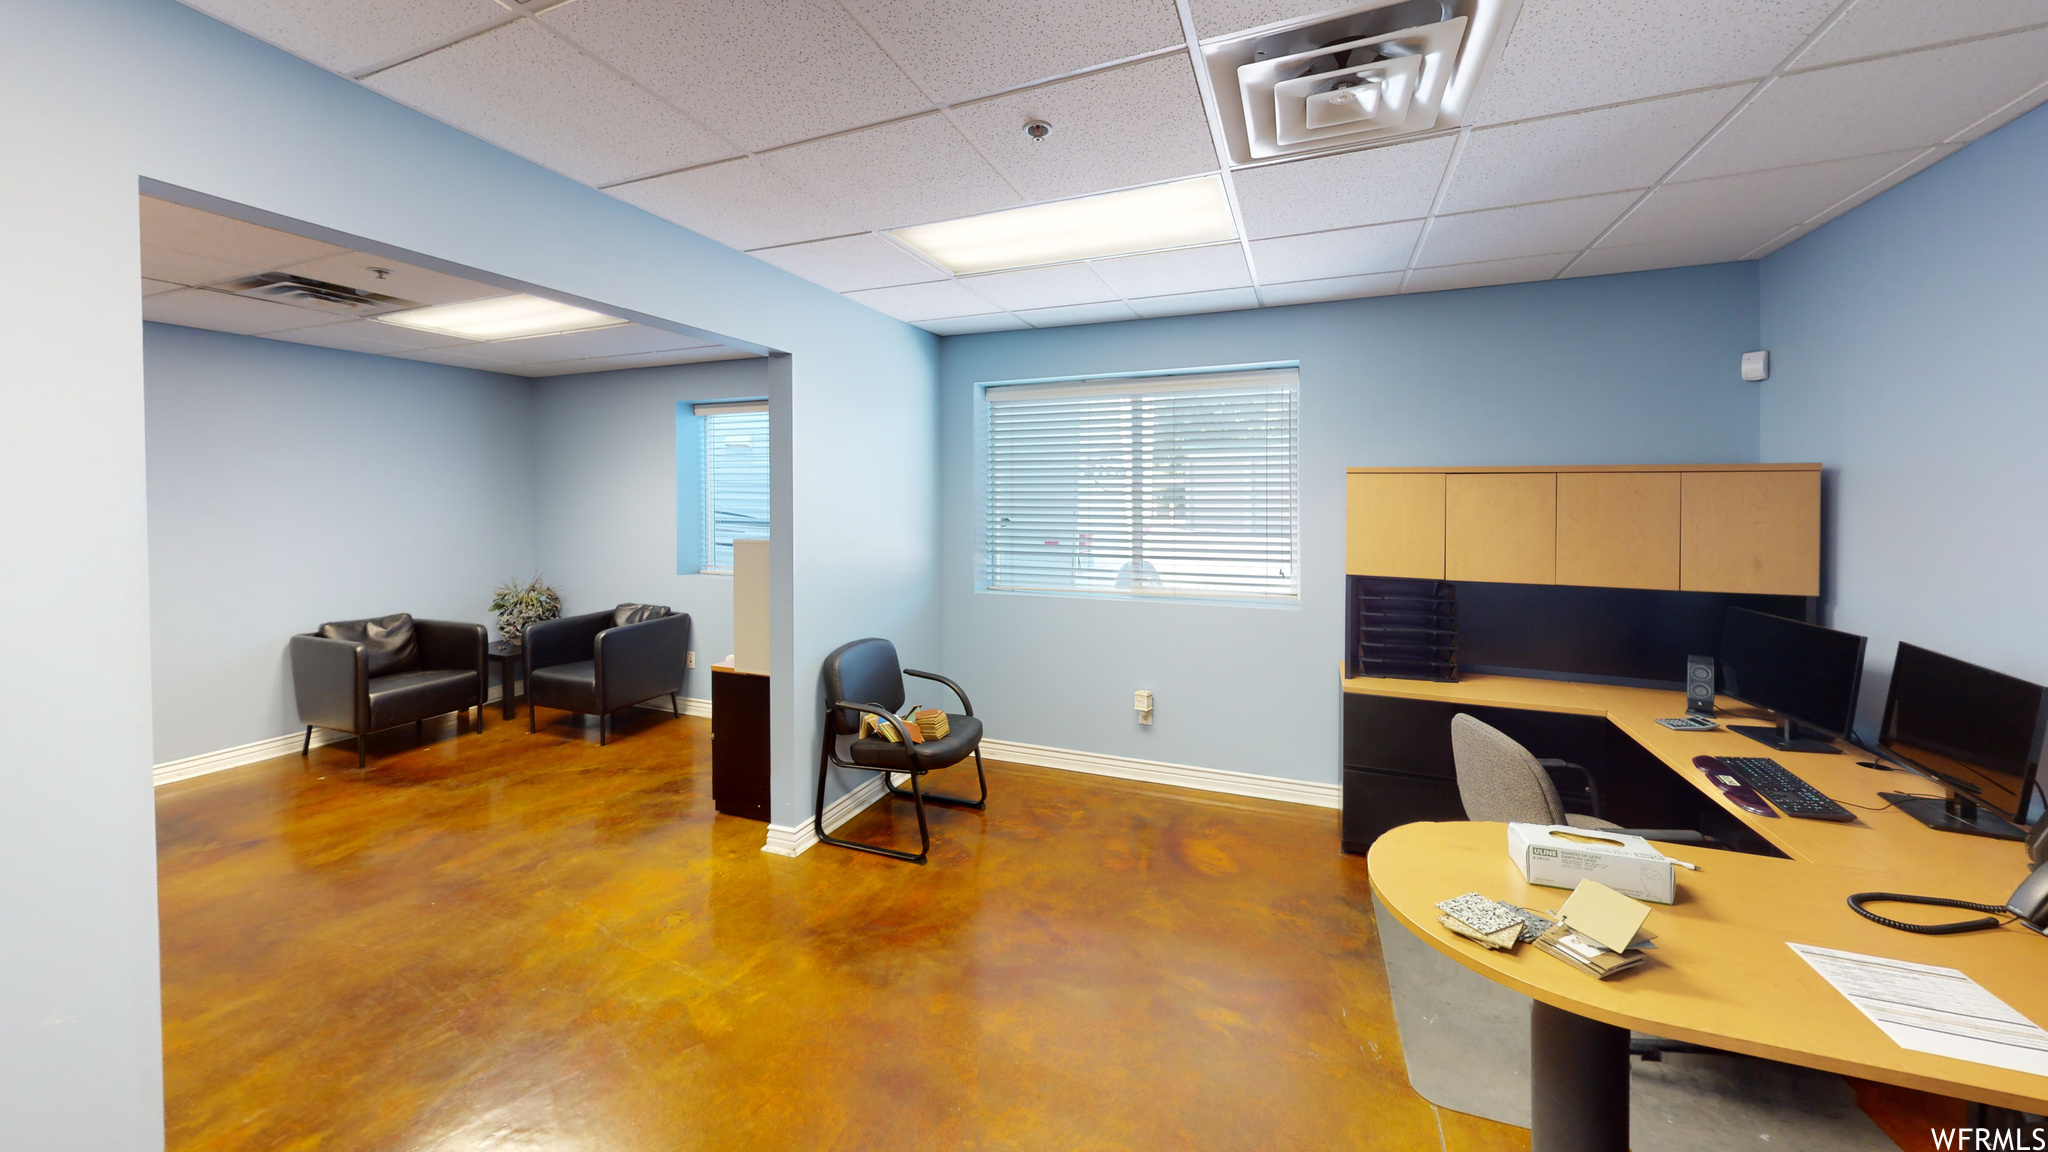 Office space with a drop ceiling